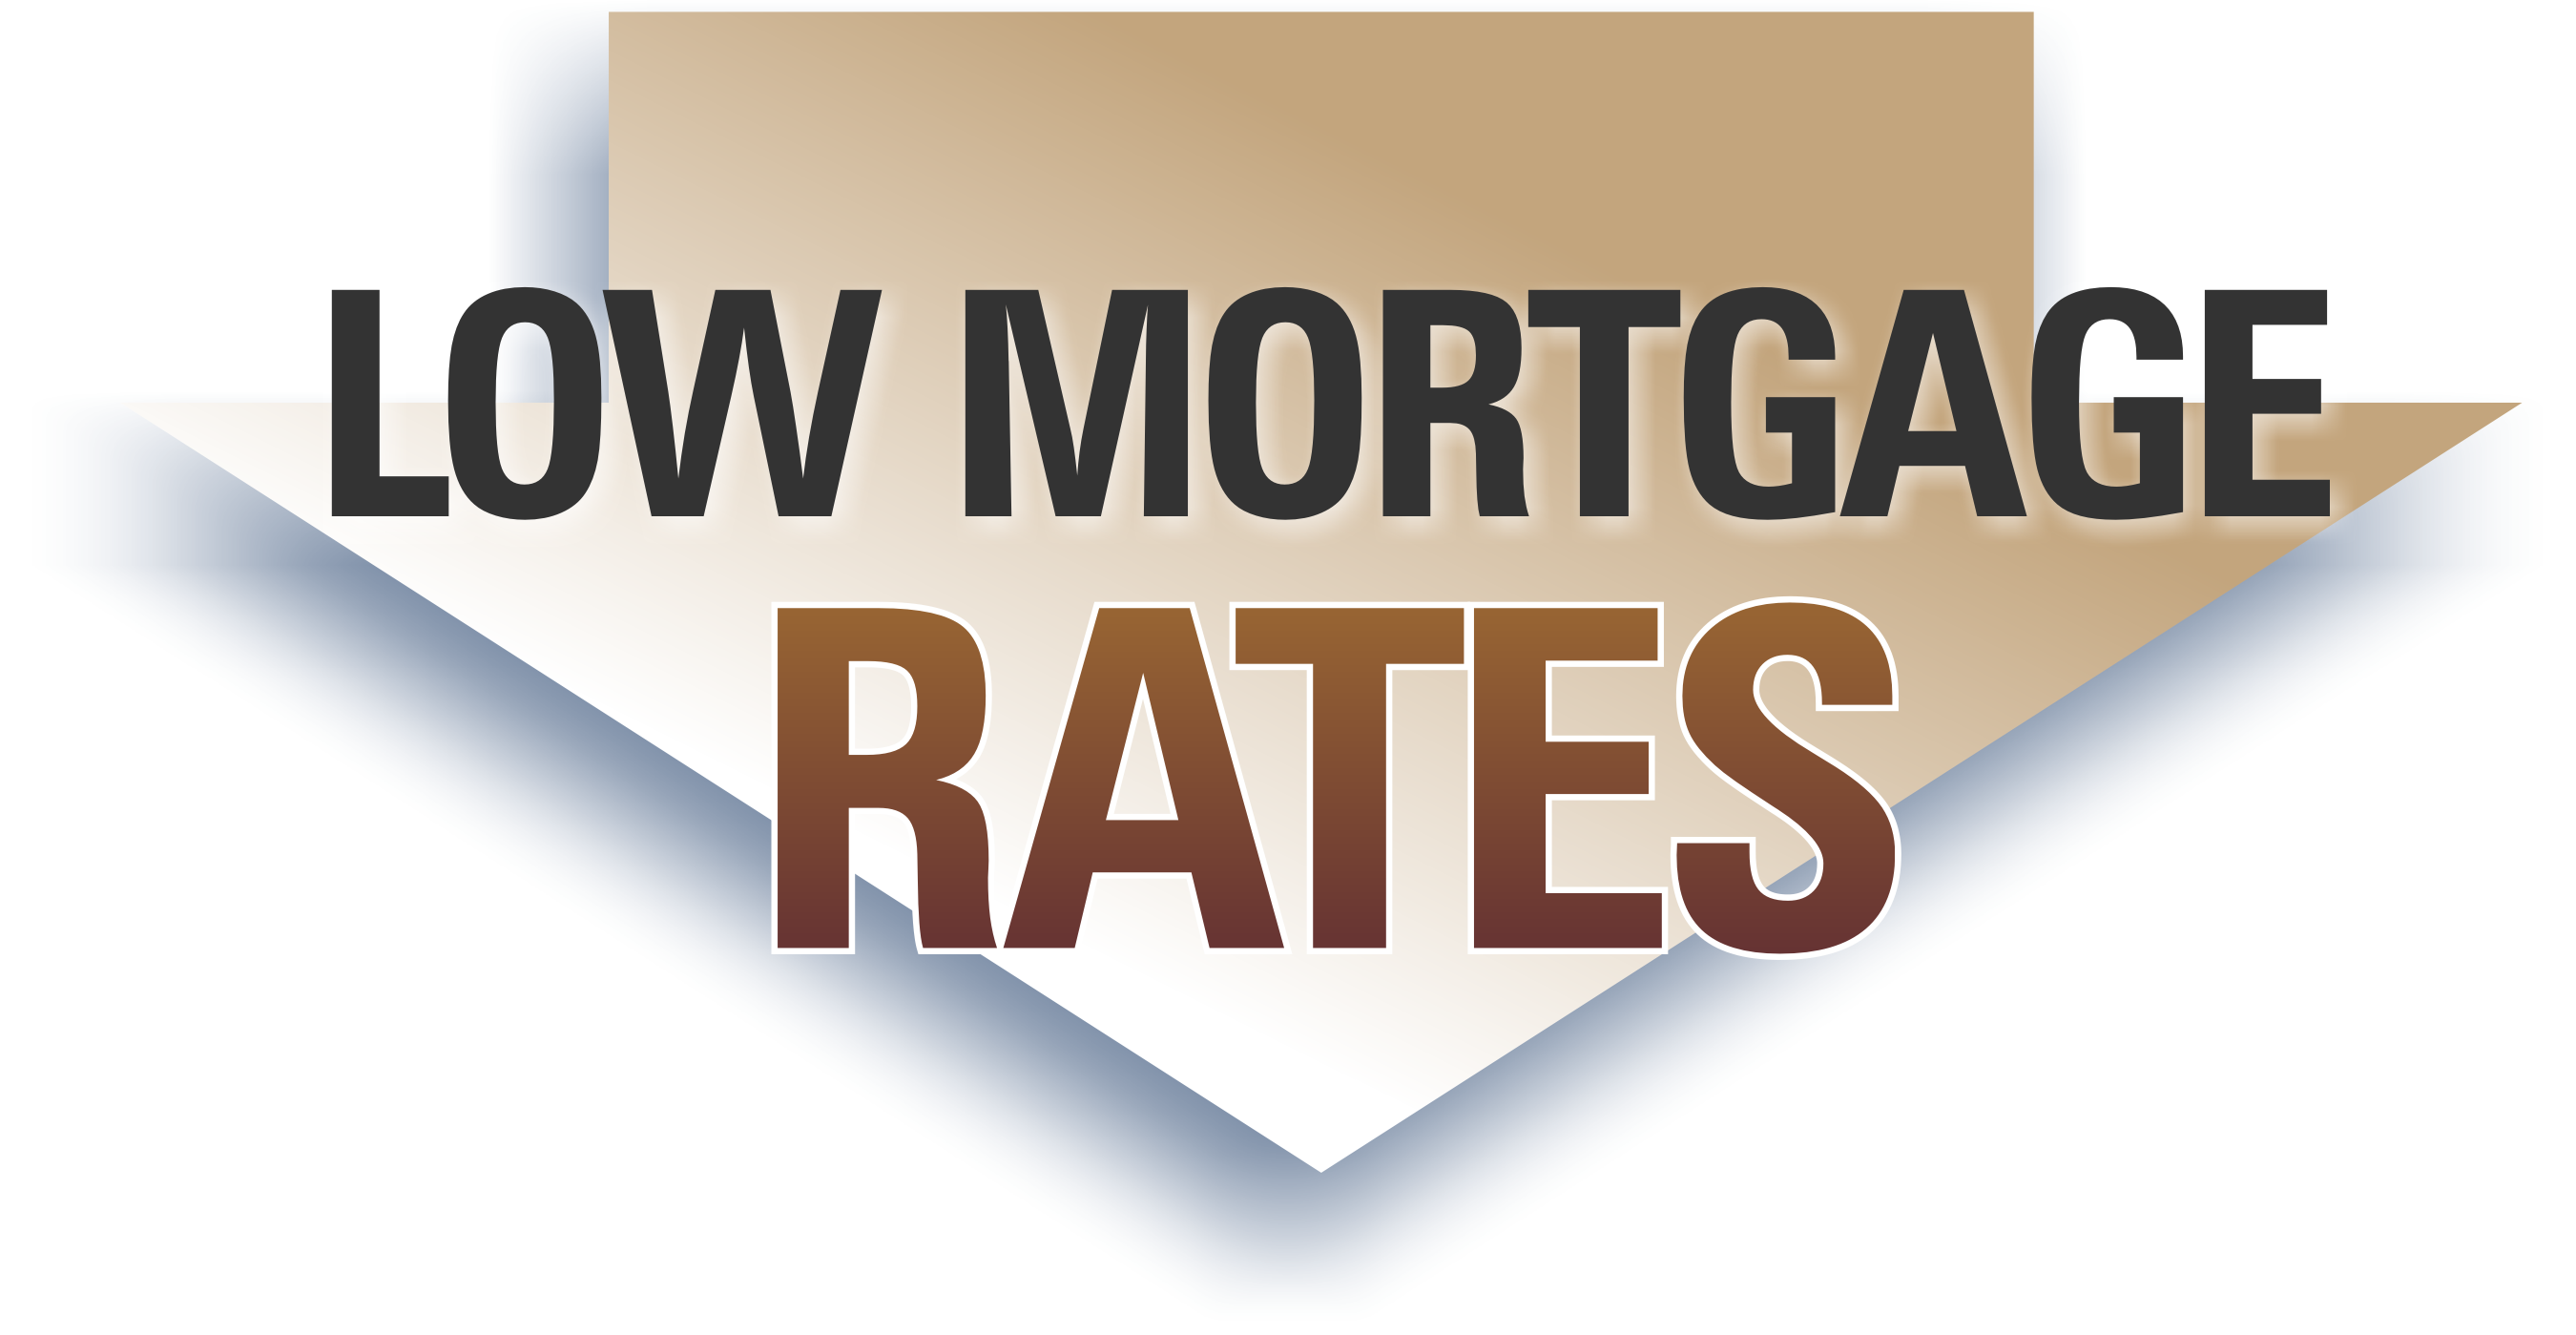 Mortgage rates hit 2014 low on bizarre sequence of events ...